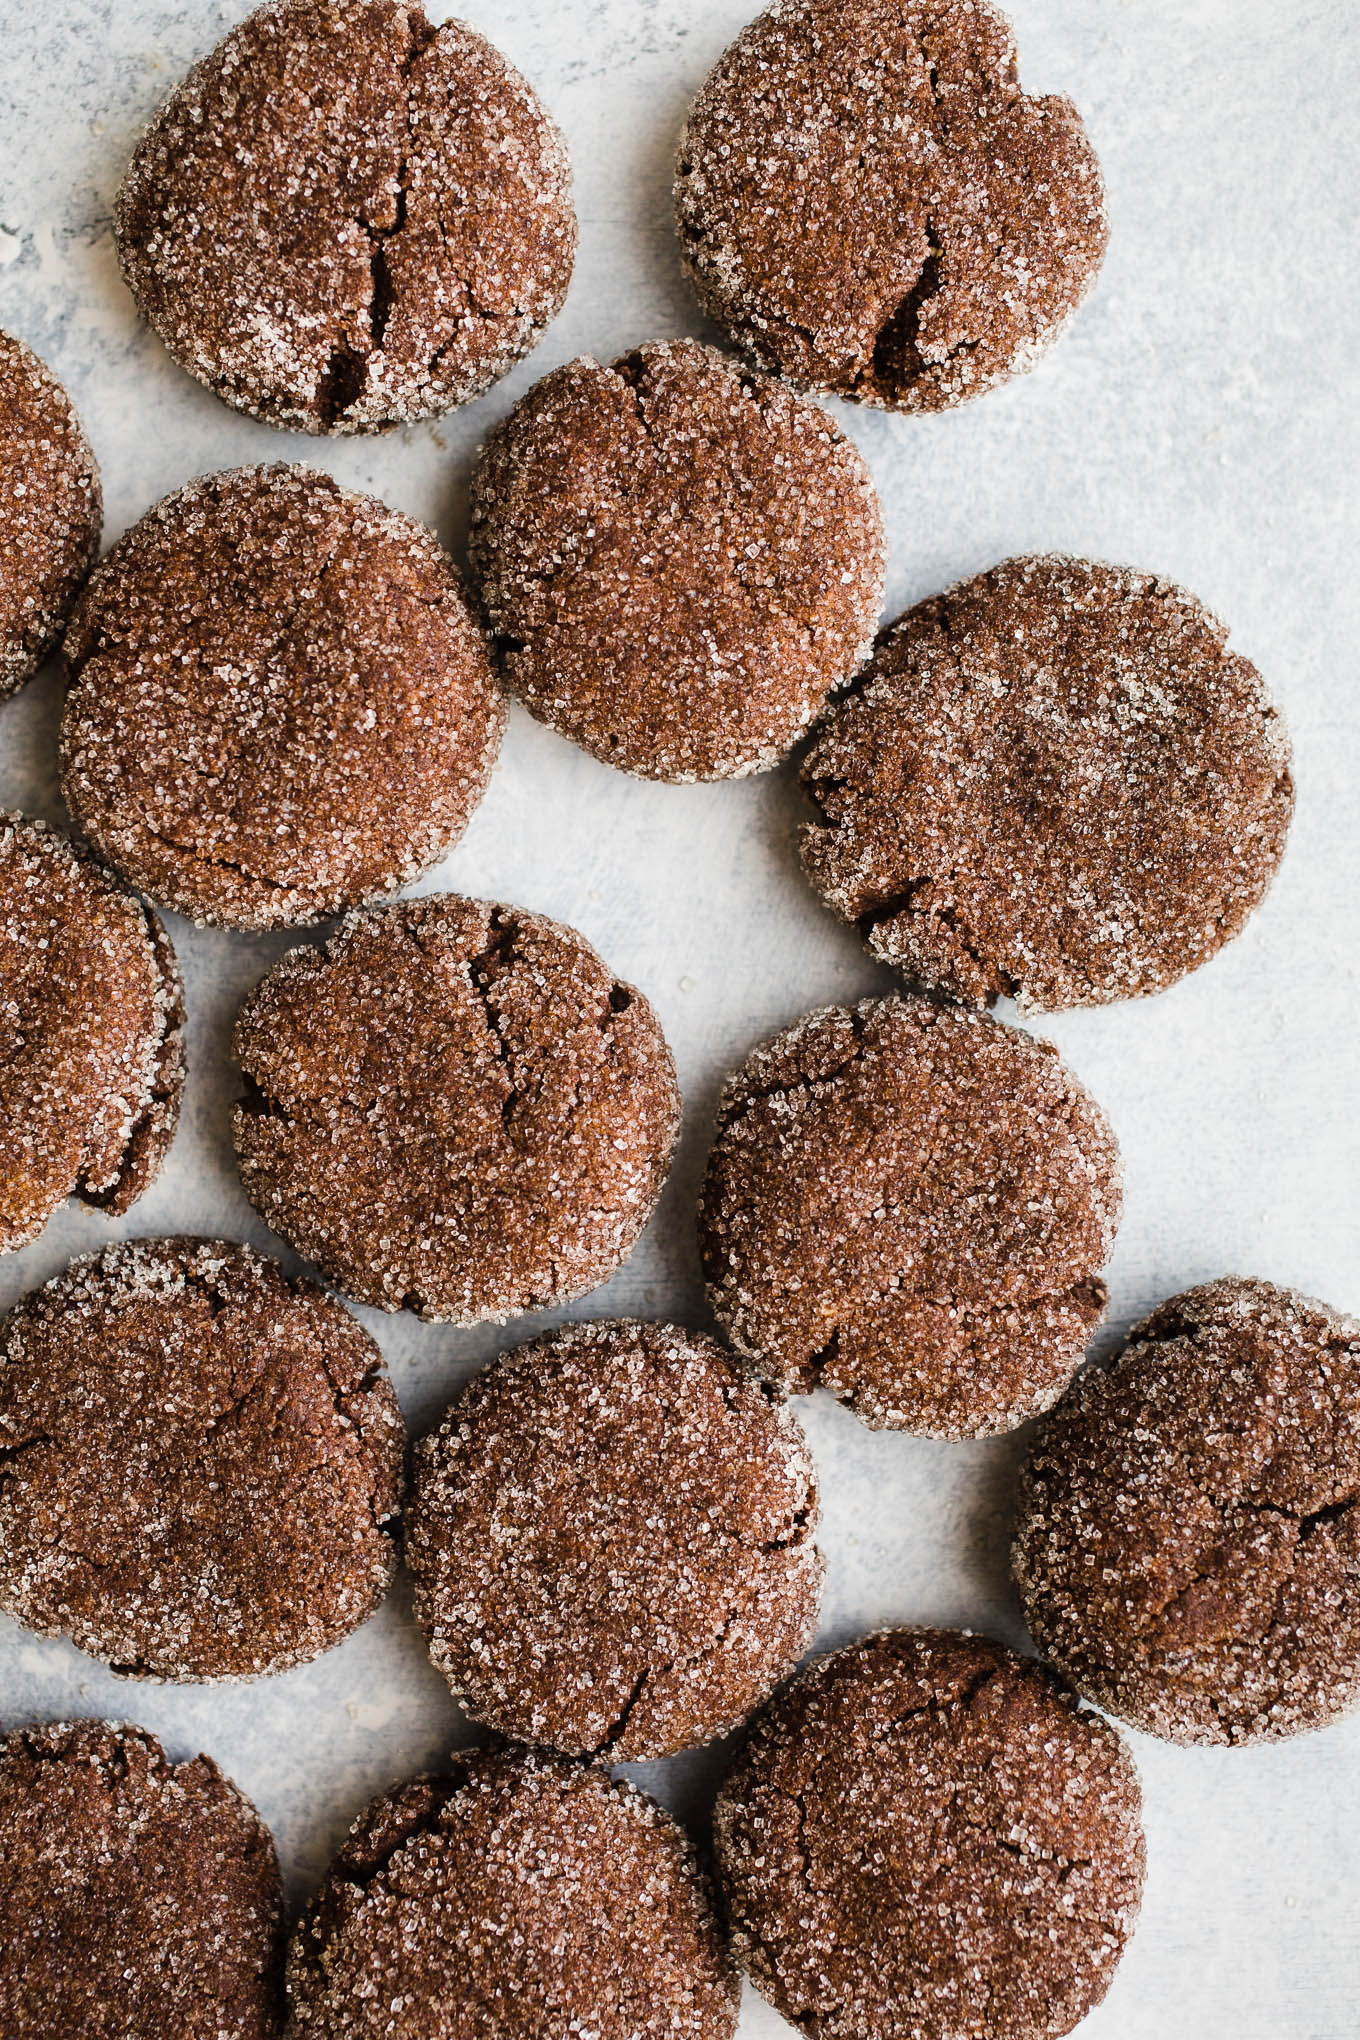 A combination of cocoa, almond flour, vanilla, and molasses make these Chewy Chocolate Molasses Cookies soft and delicious. An easy gluten-free, vegan cookie!